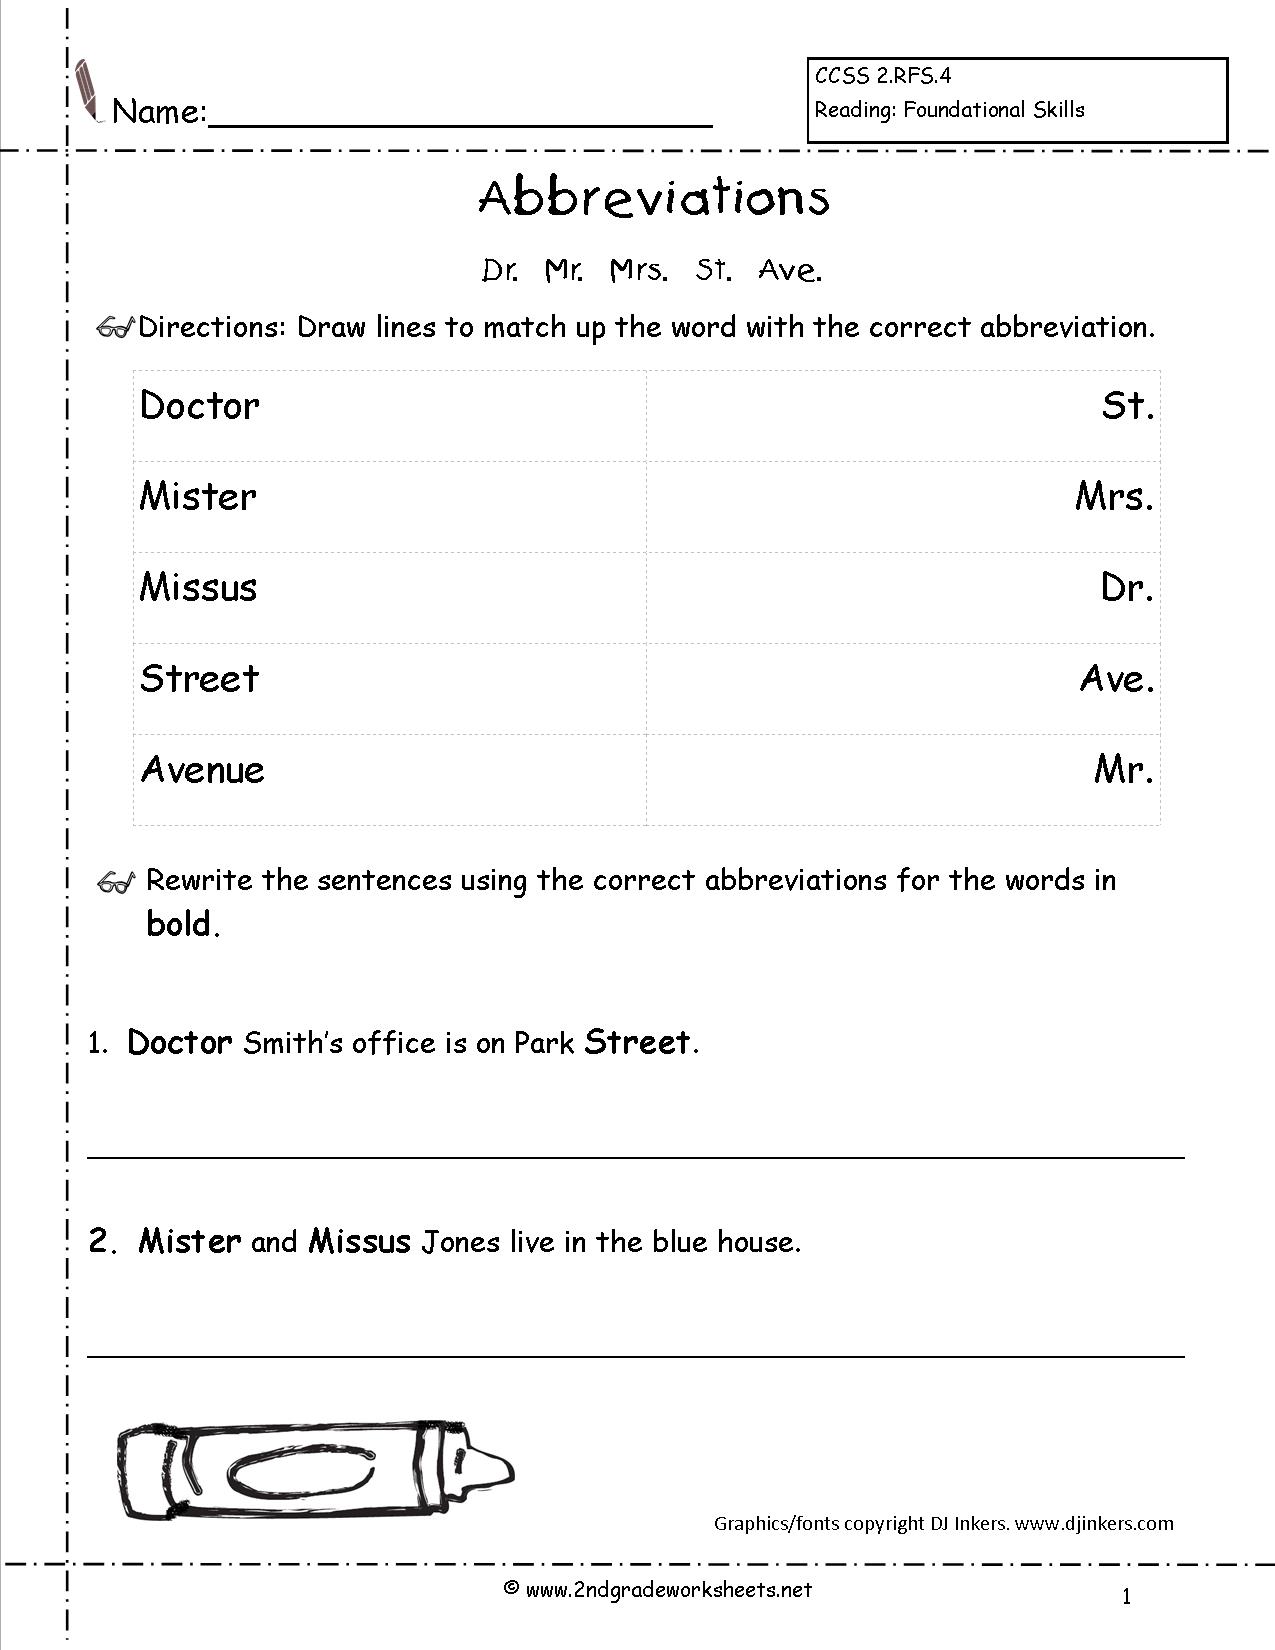 18-best-images-of-abbreviation-worksheets-for-students-common-abbreviations-worksheet-state